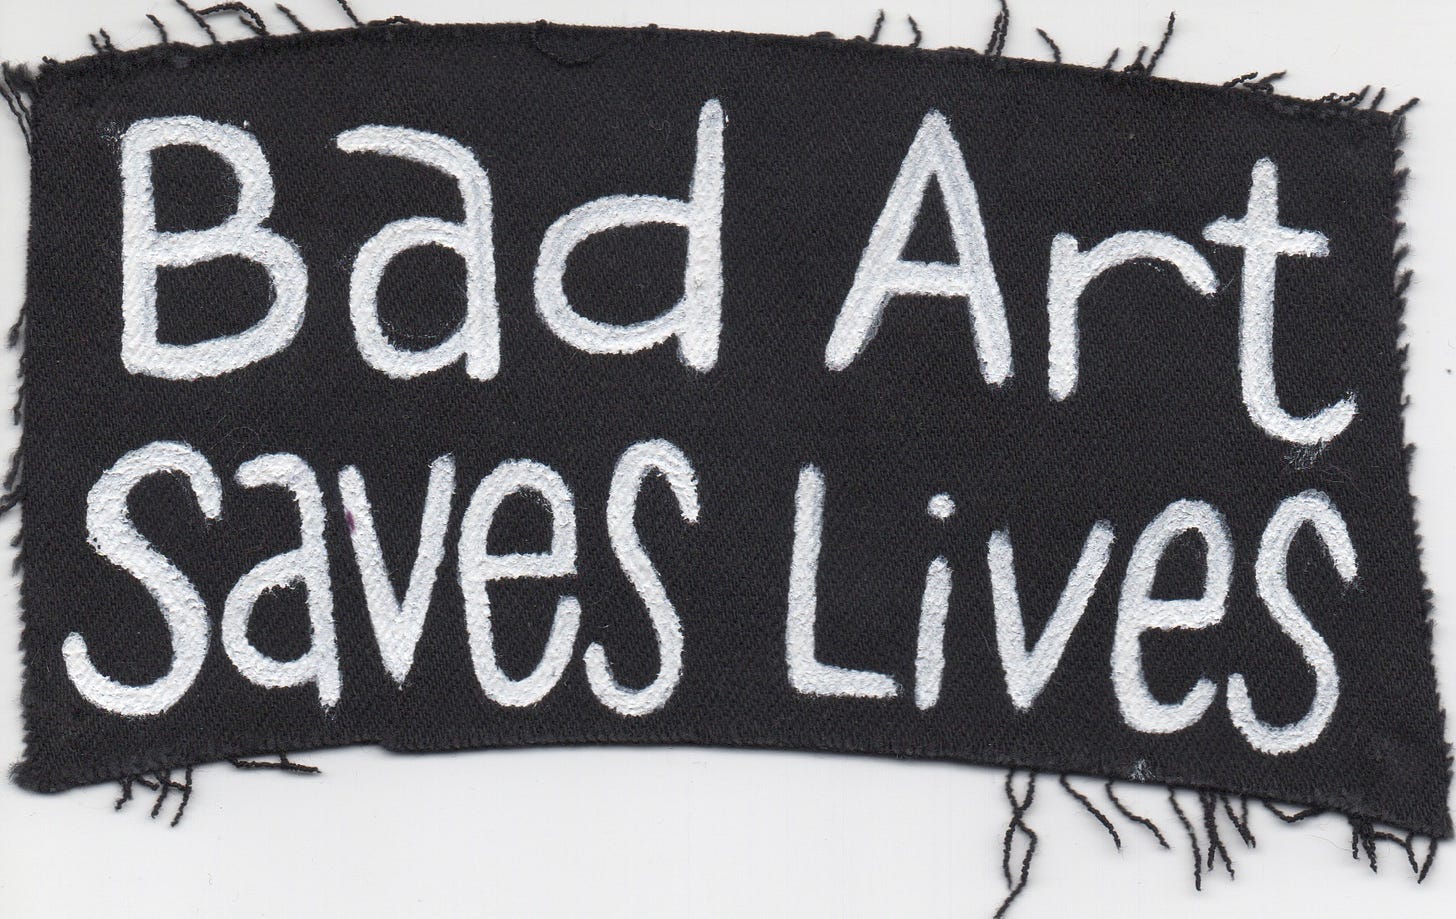 Painted “Bad Art Saves Lives” Patch on fabric from a pair of jeans.